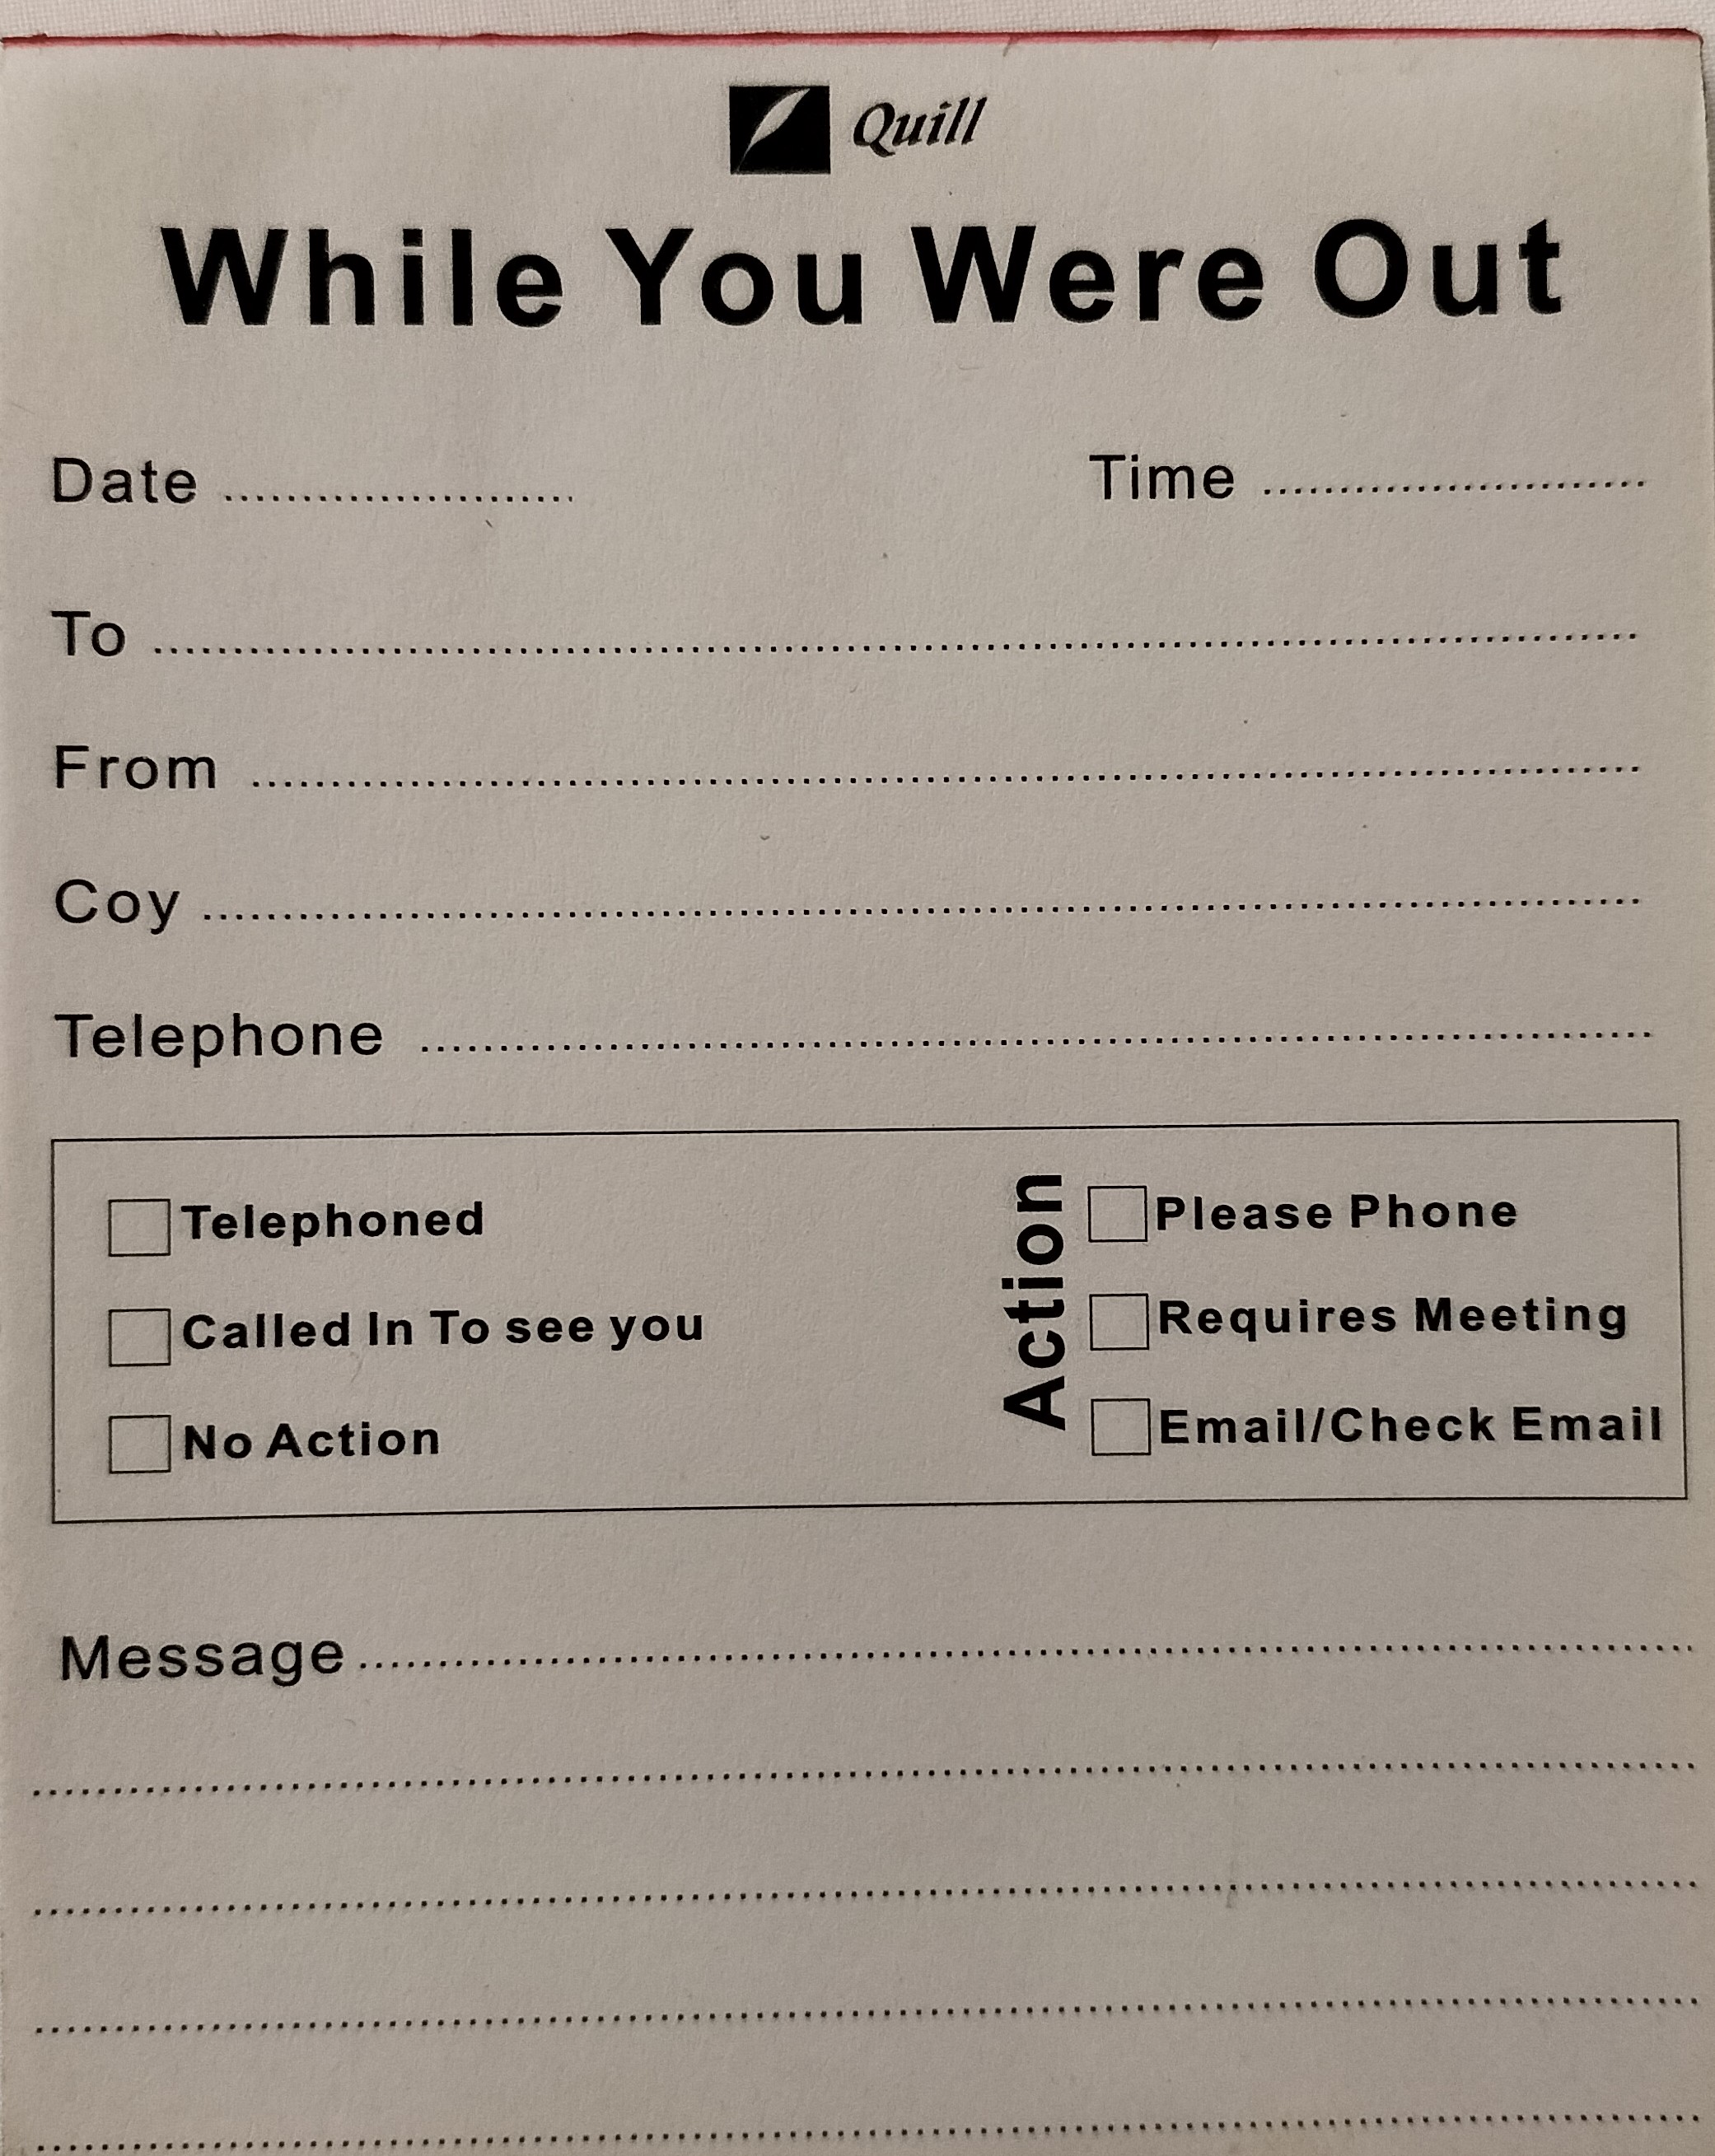 Telephone Message Pad "While You Were Out"